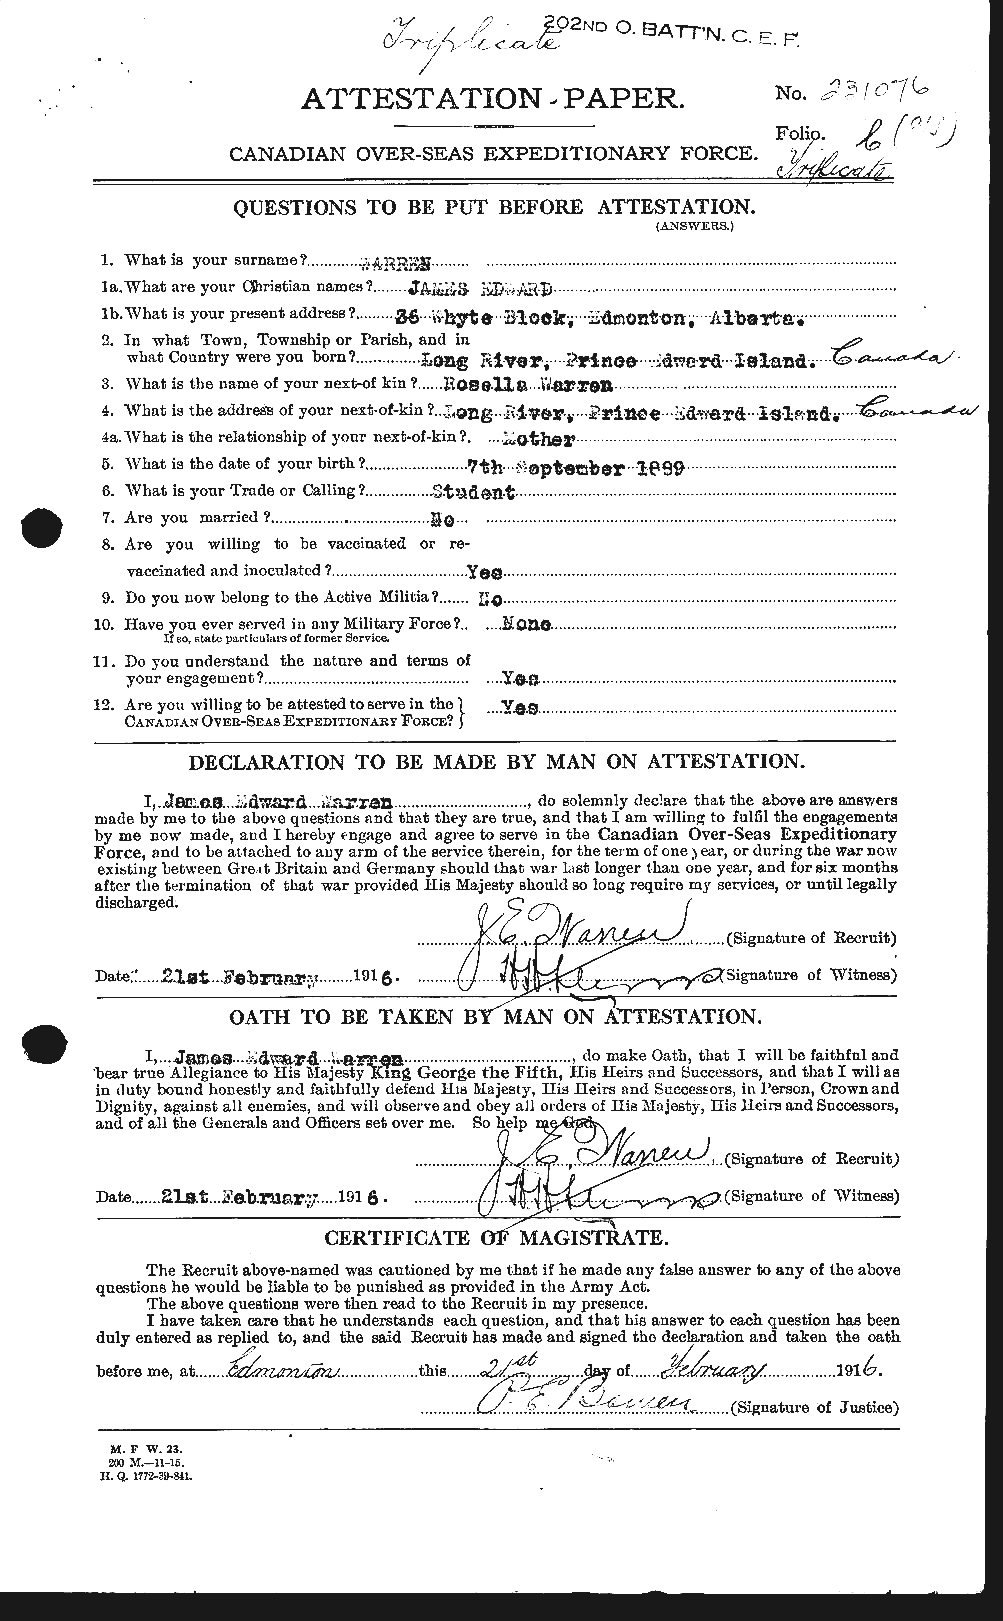 Personnel Records of the First World War - CEF 658528a